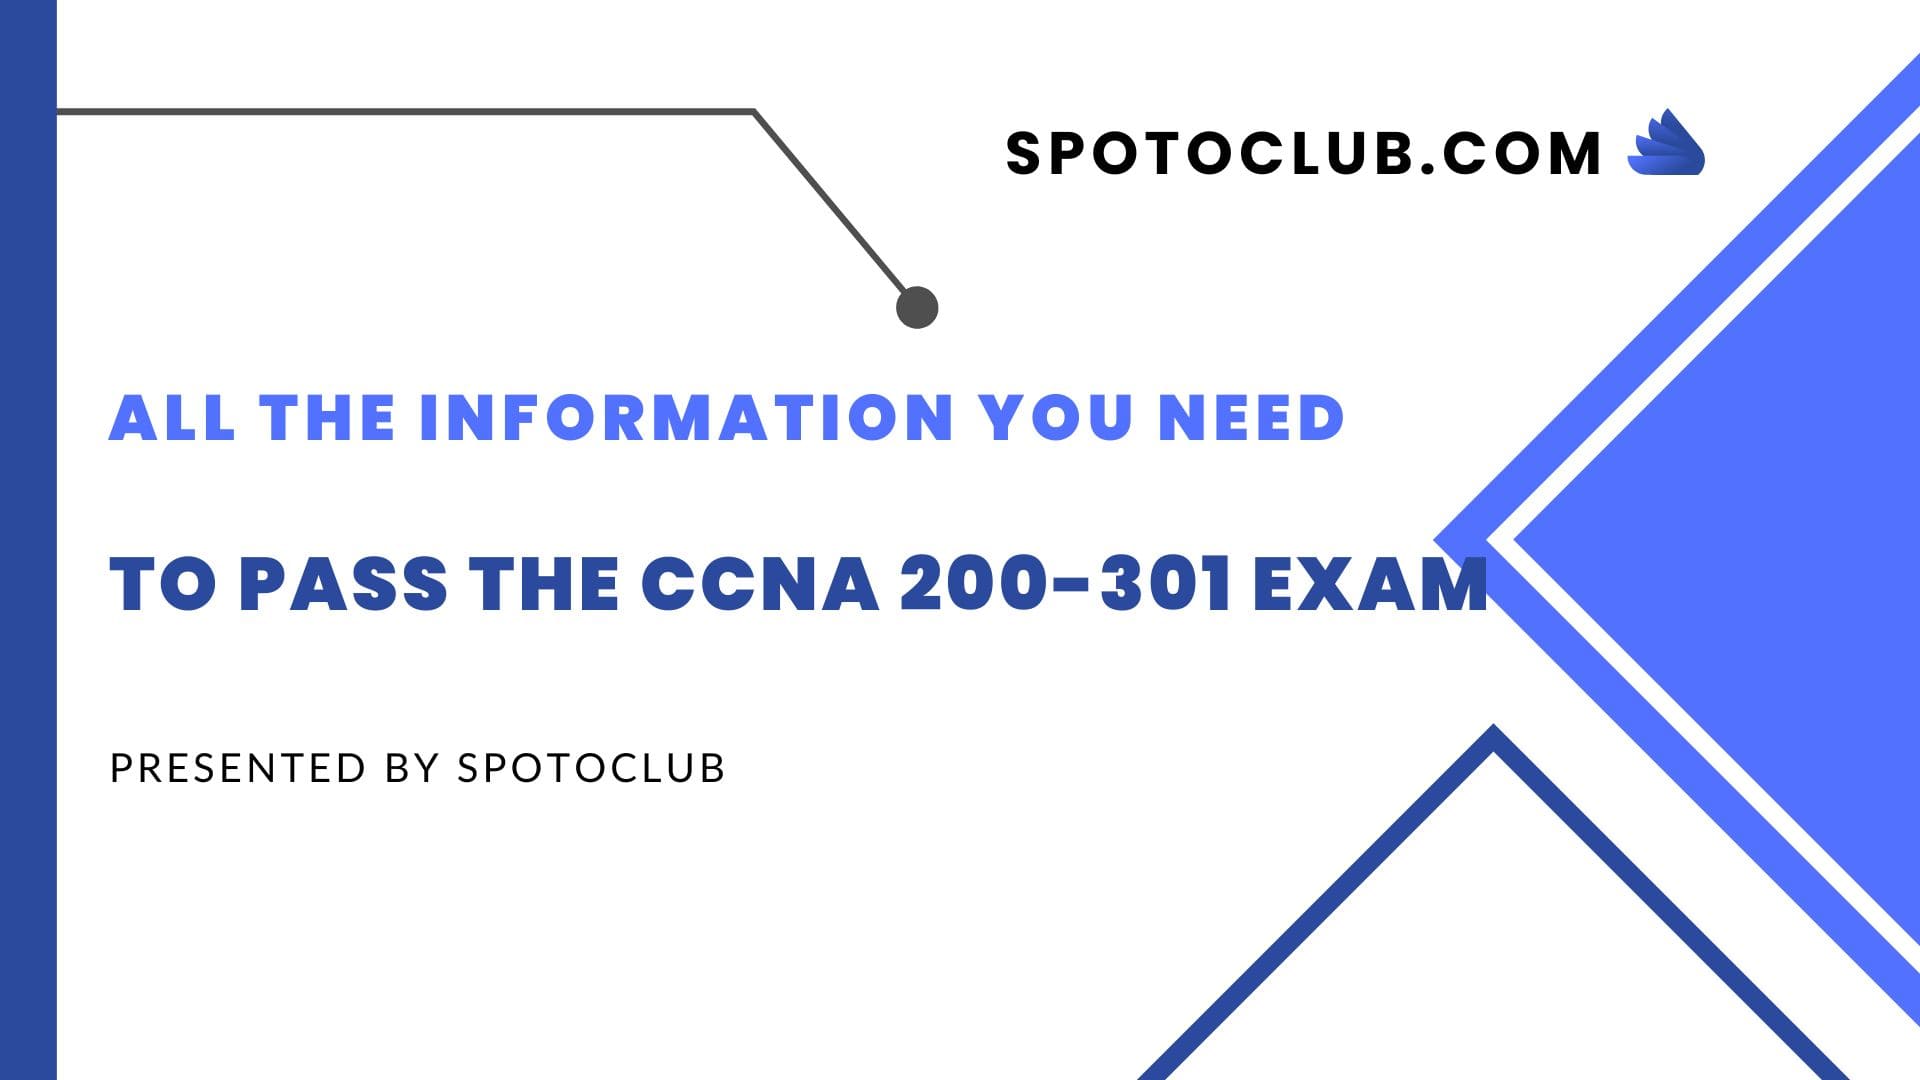 All the Information You Need to Pass the CCNA 200-301 Exam